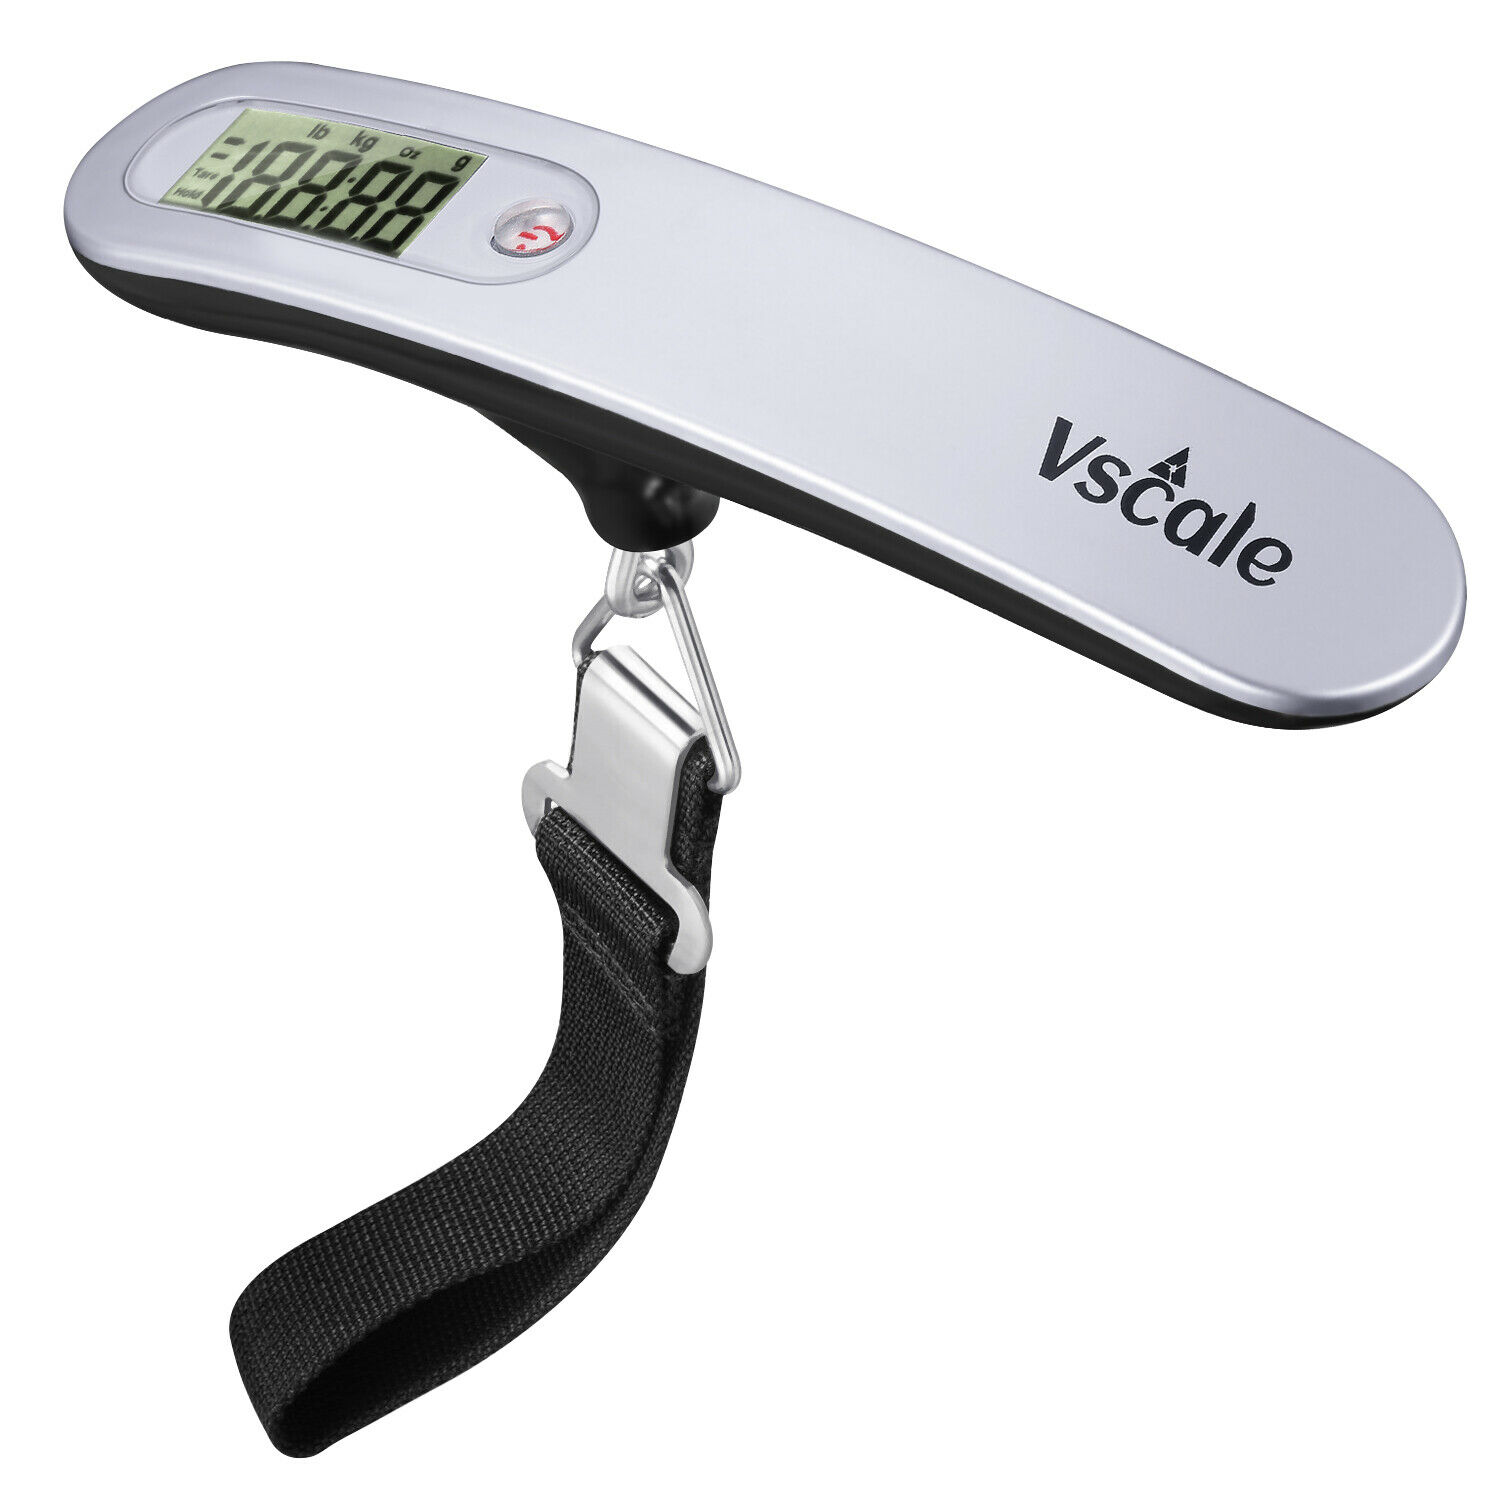 Vscale® Luggage Scale [xt500] Digital Portable Travel Weight Scale 110lb / 50kg